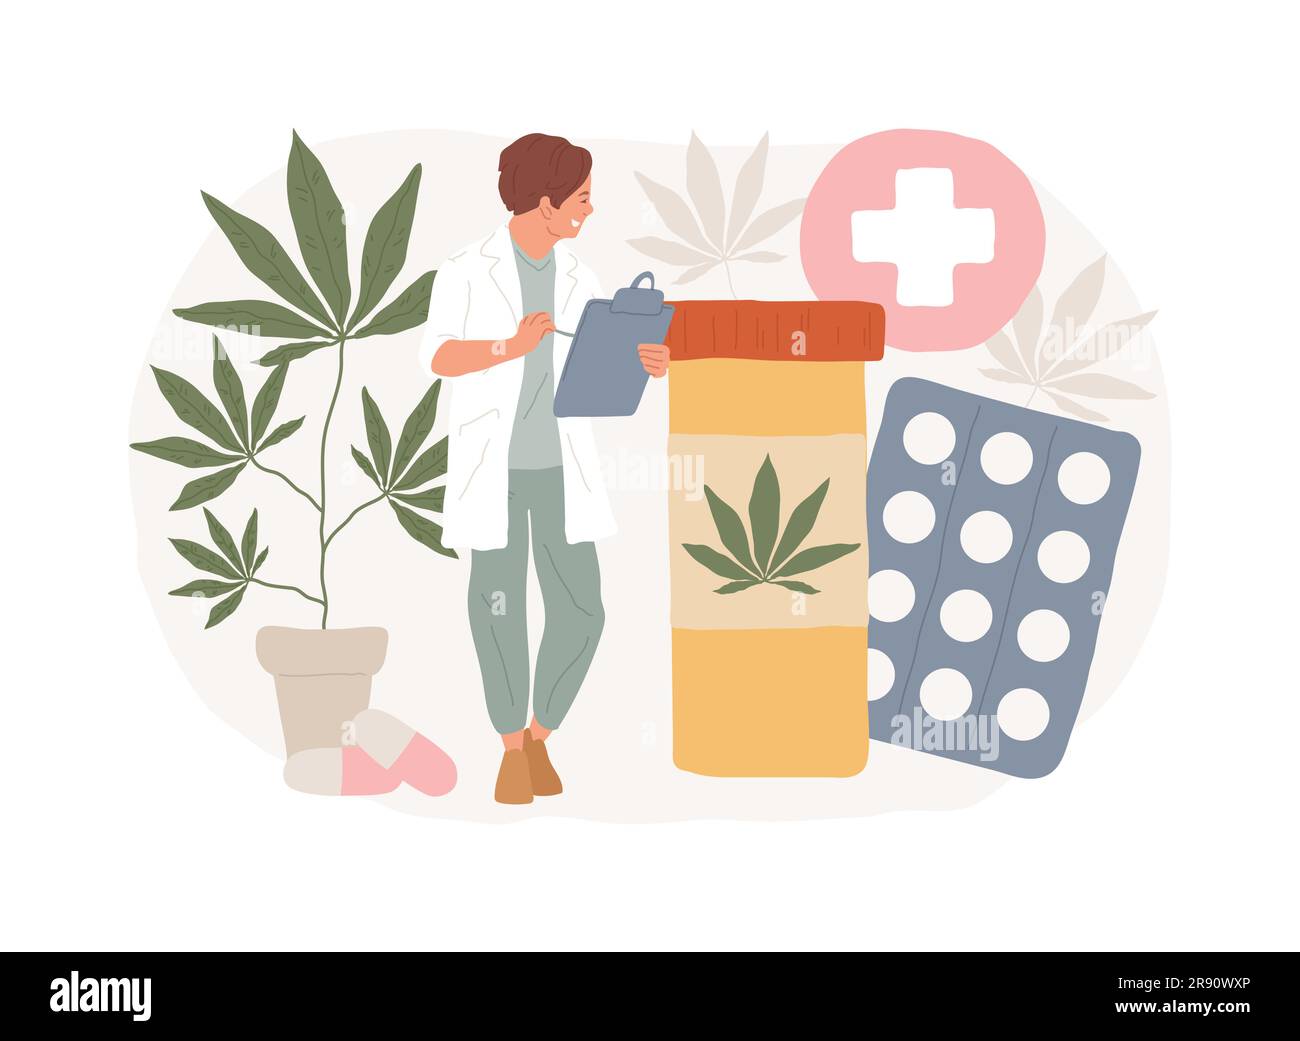 Medical marijuana isolated concept vector illustration. Medical cannabis, cannabinoids drugs, diseases and conditions treatment, cancer pain relief, hemp market, cultivation vector concept. Stock Vector